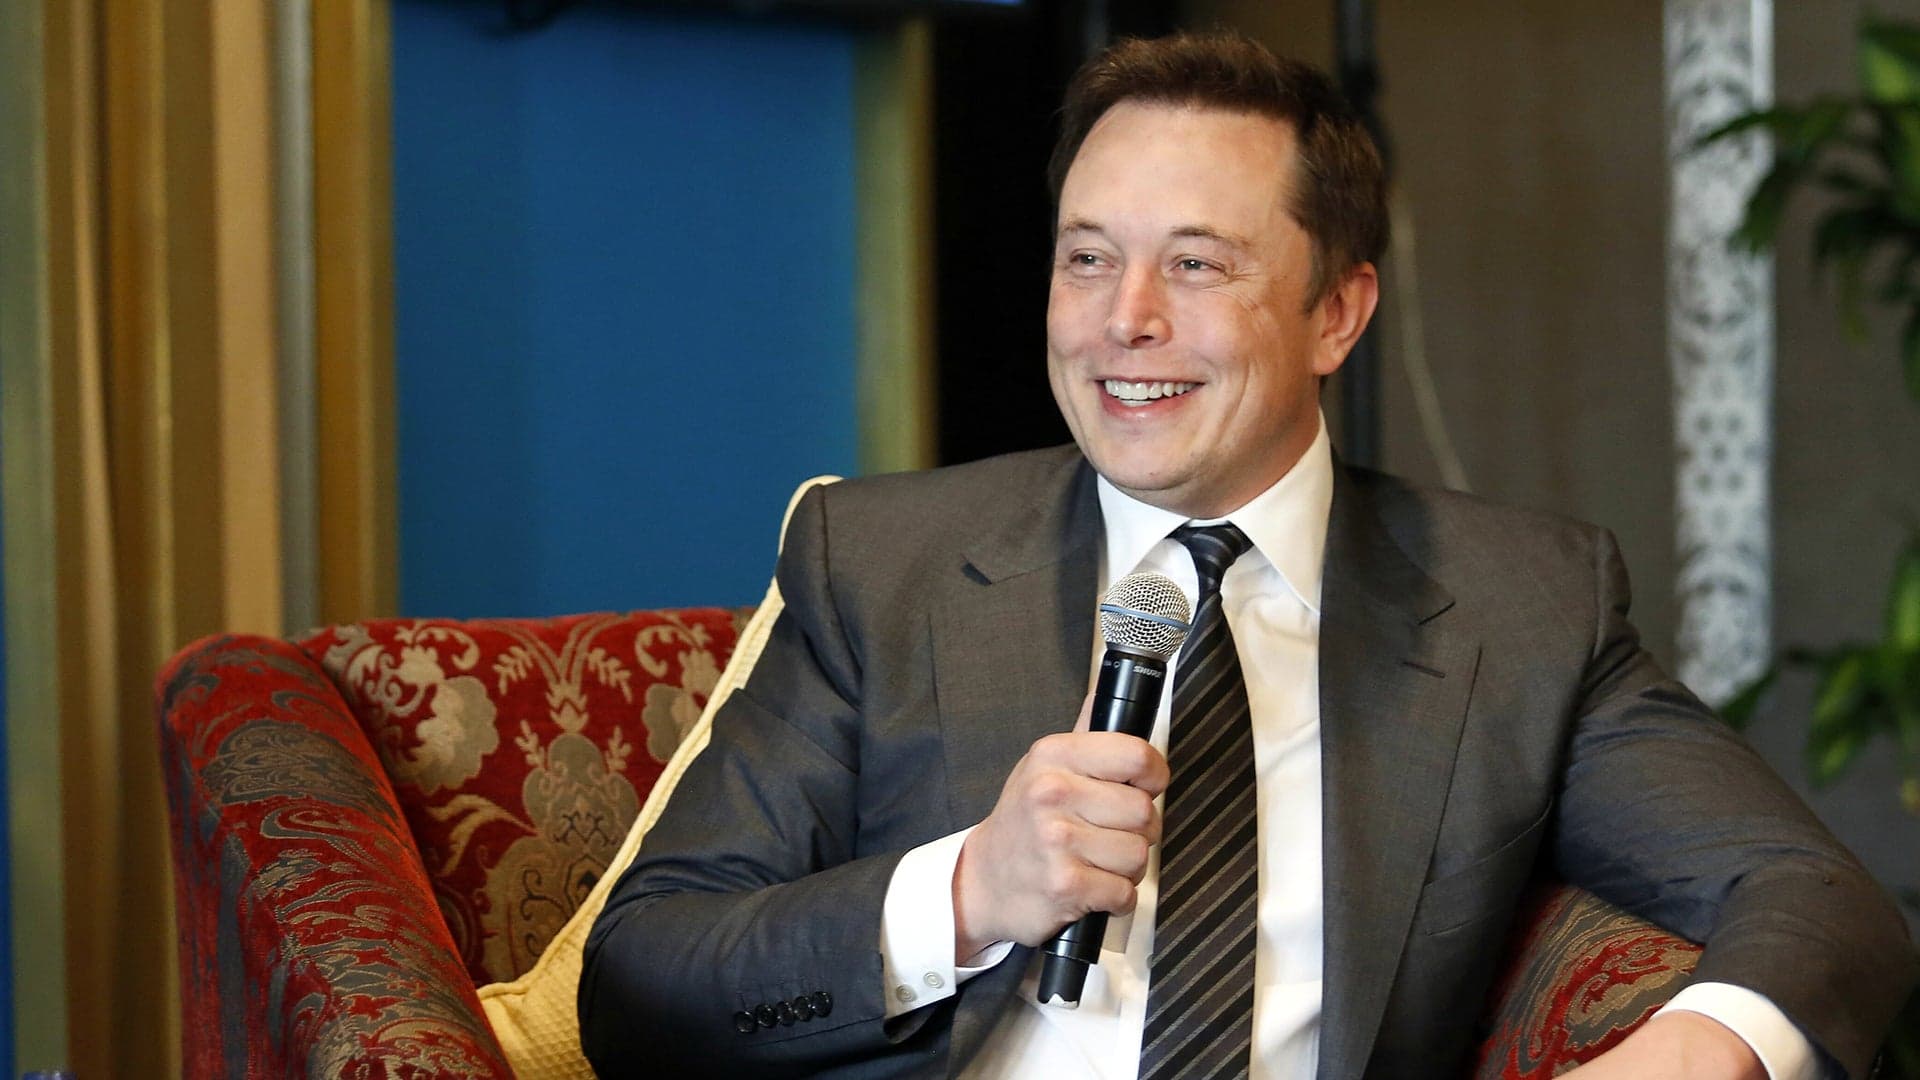 Elon Musk’s Plan for the First Tesla Commercial Came From a 10-Year-Old